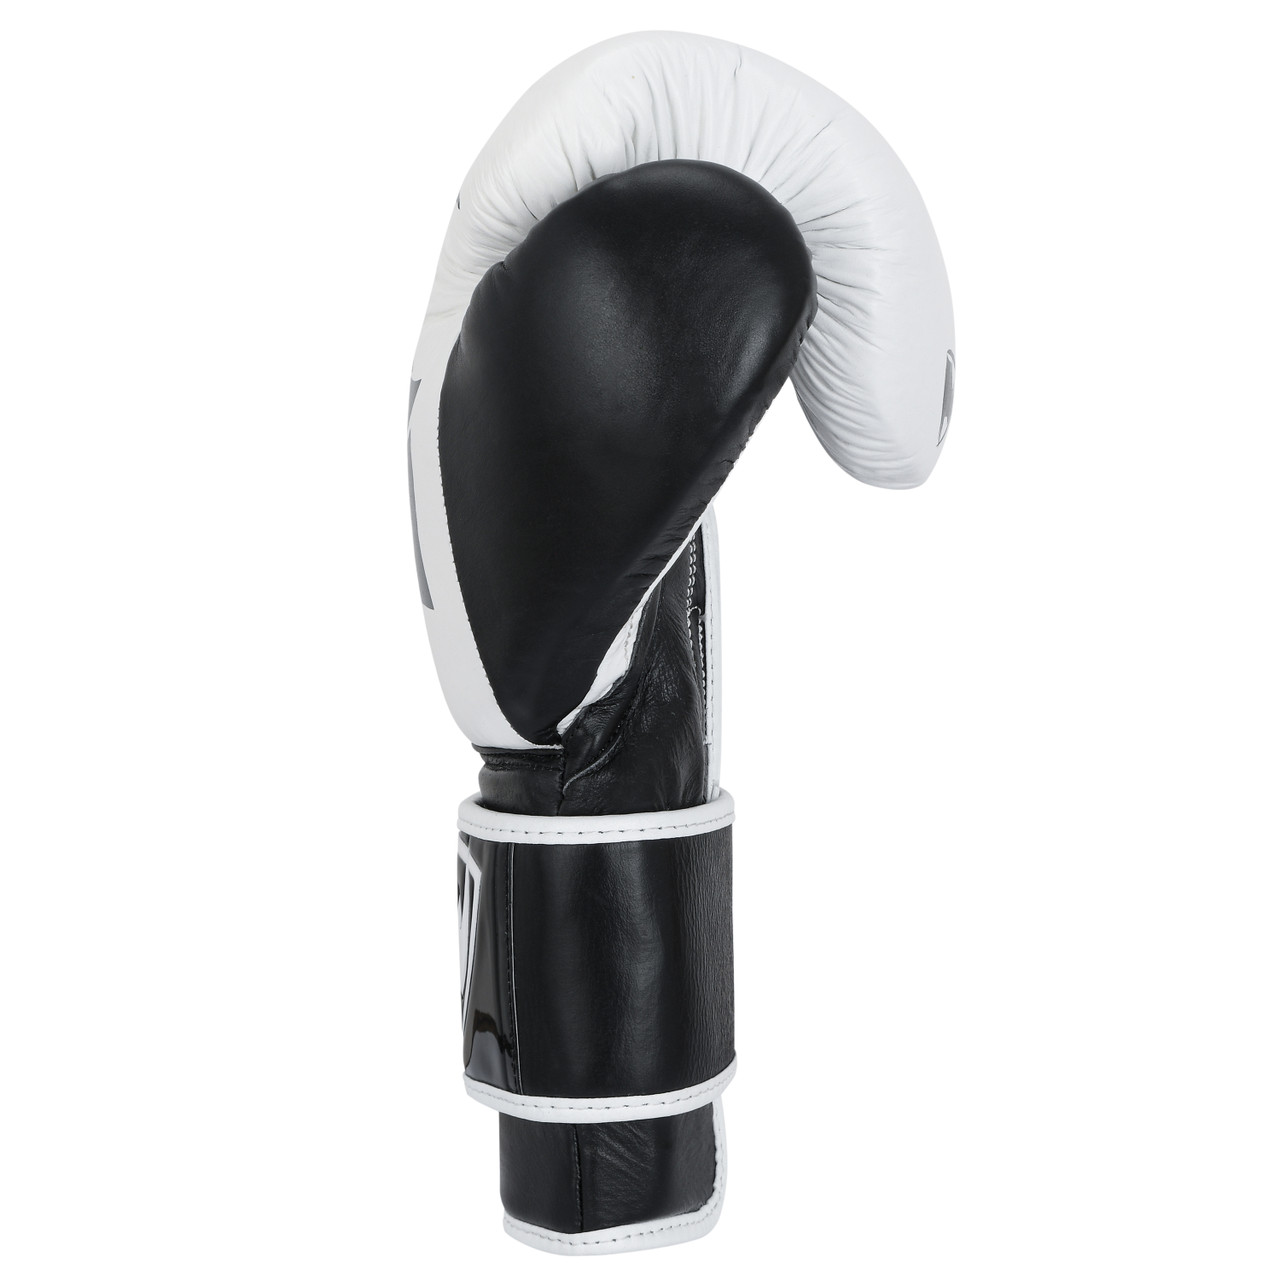 PROLAST LX Training Gloves with Hook and Loop Closure White/Black